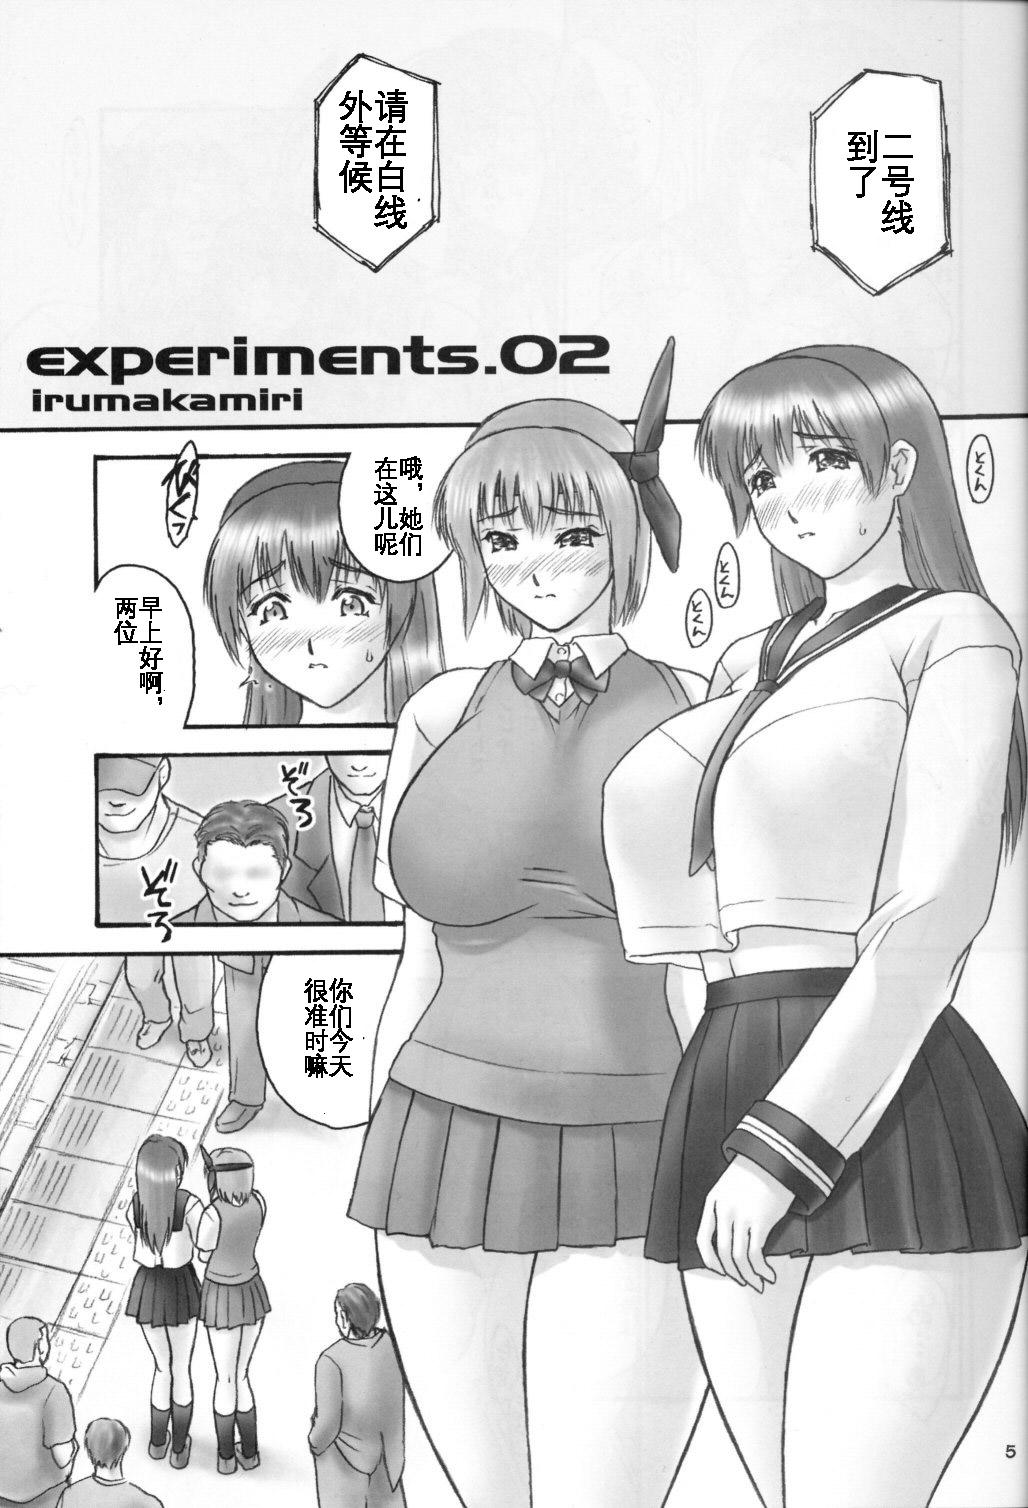 Cumshot experiments.02 - Dead or alive Pussylick - Page 5